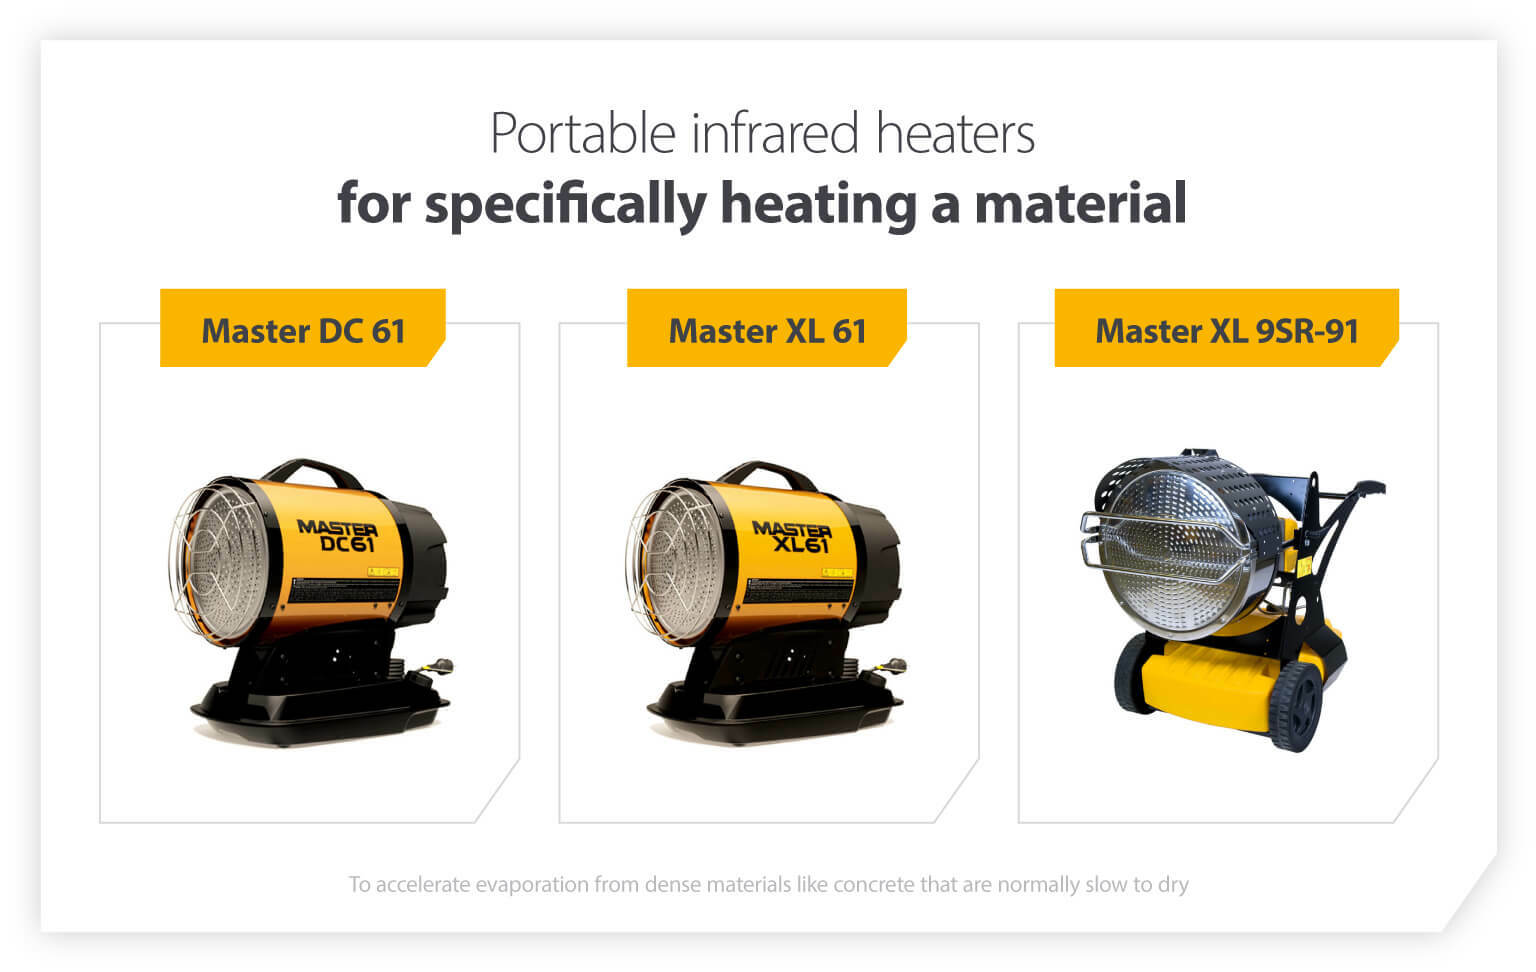 Master portable infrared heaters